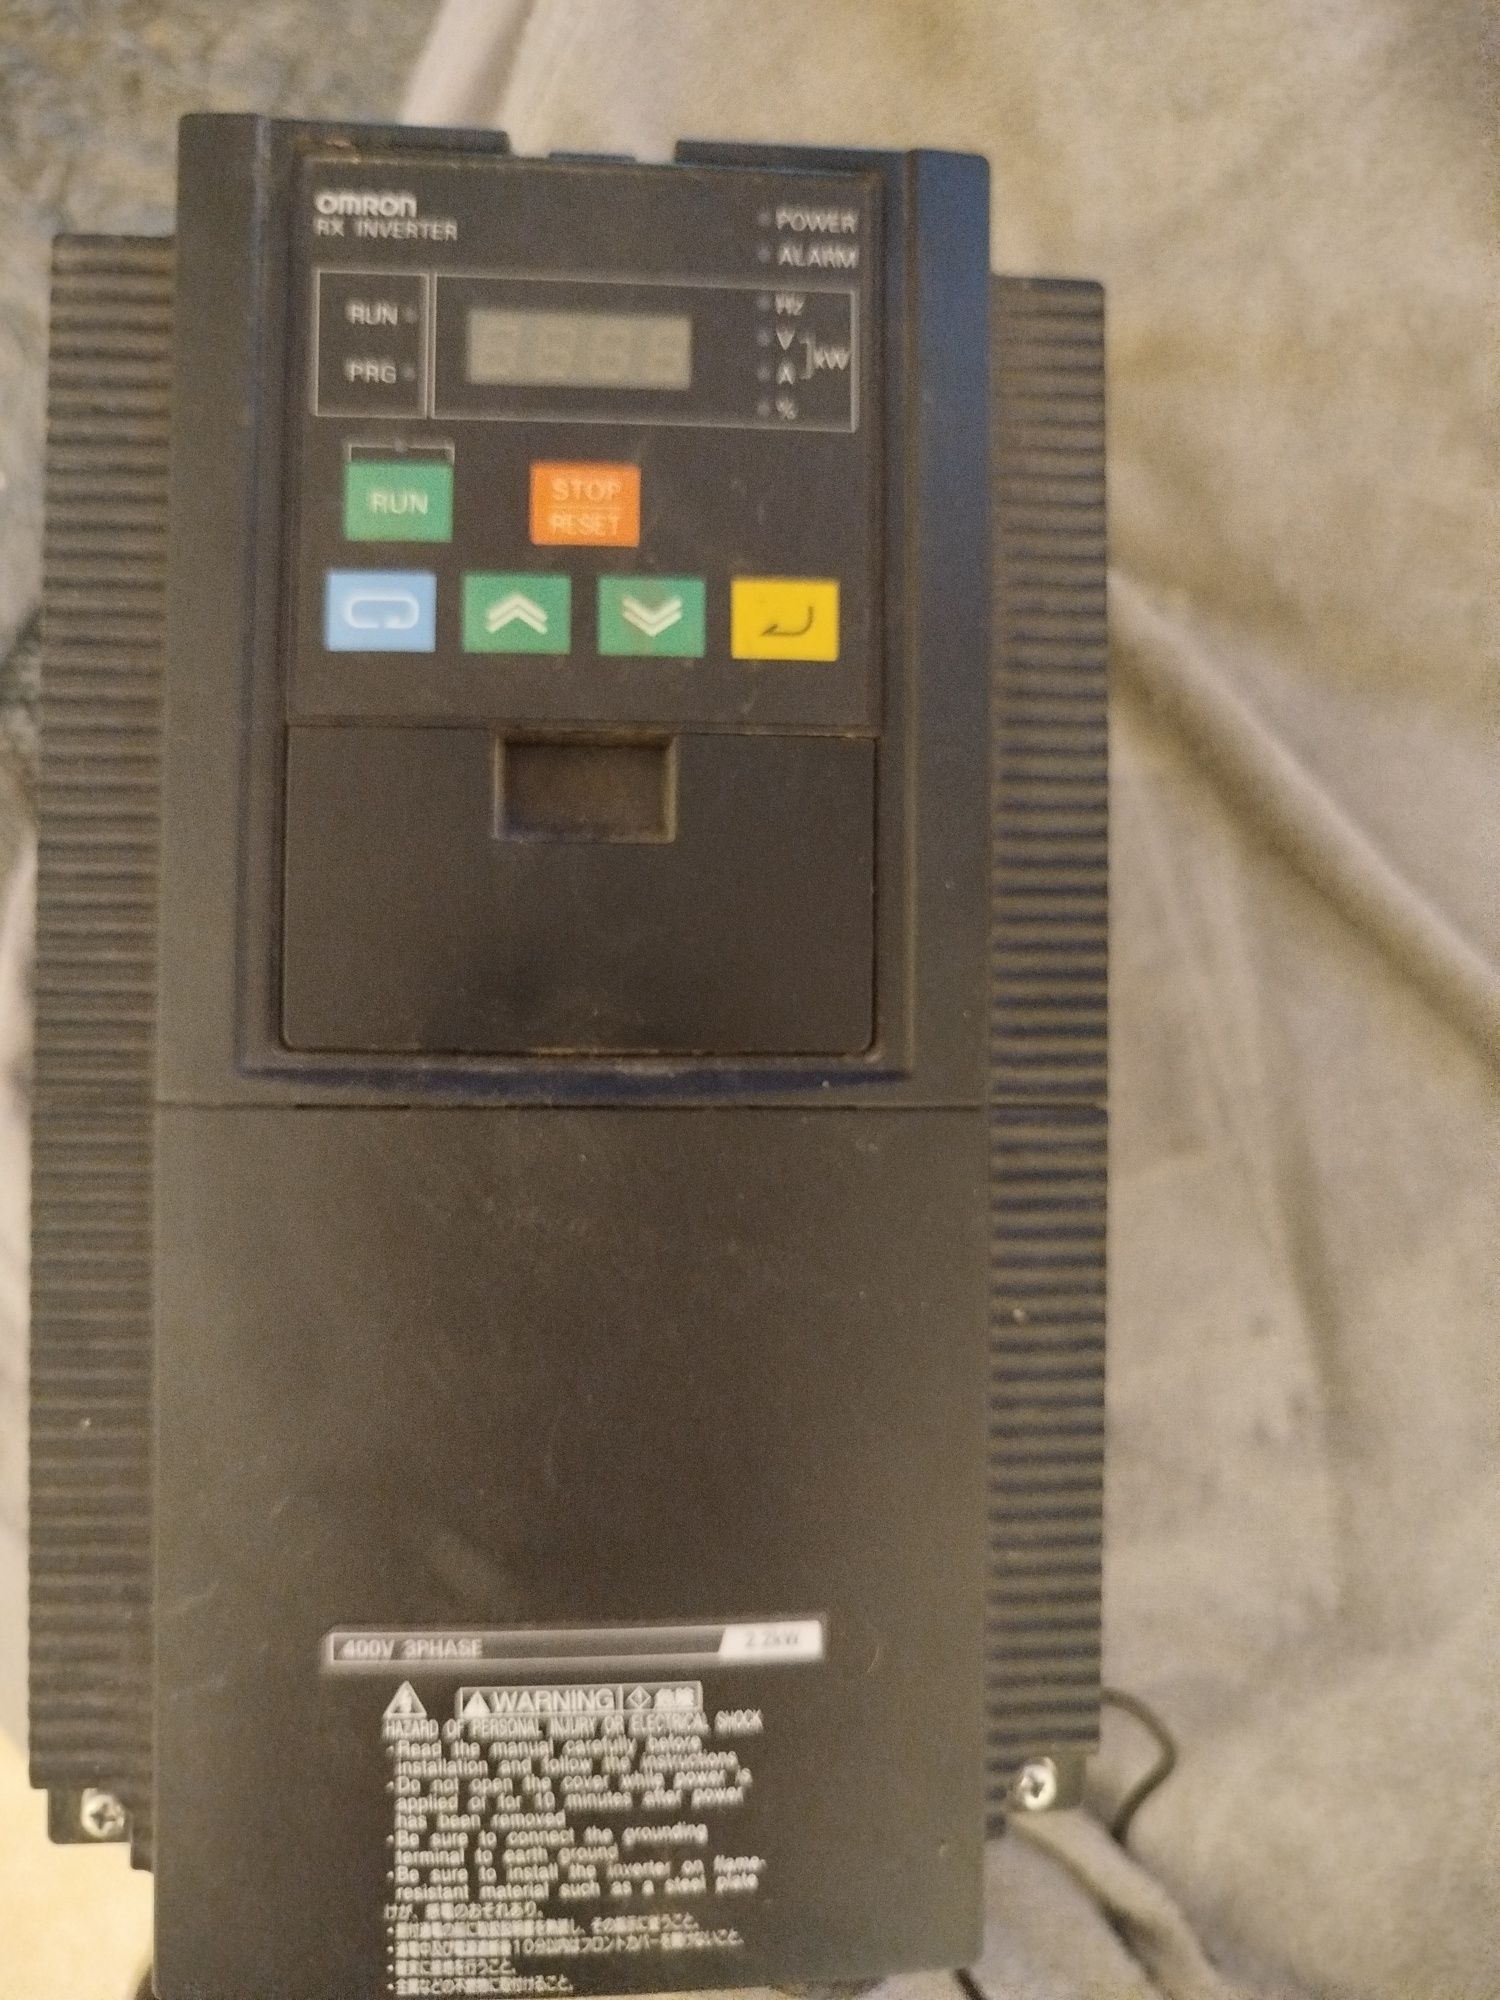 omron rx Inverter rx a4022 ef